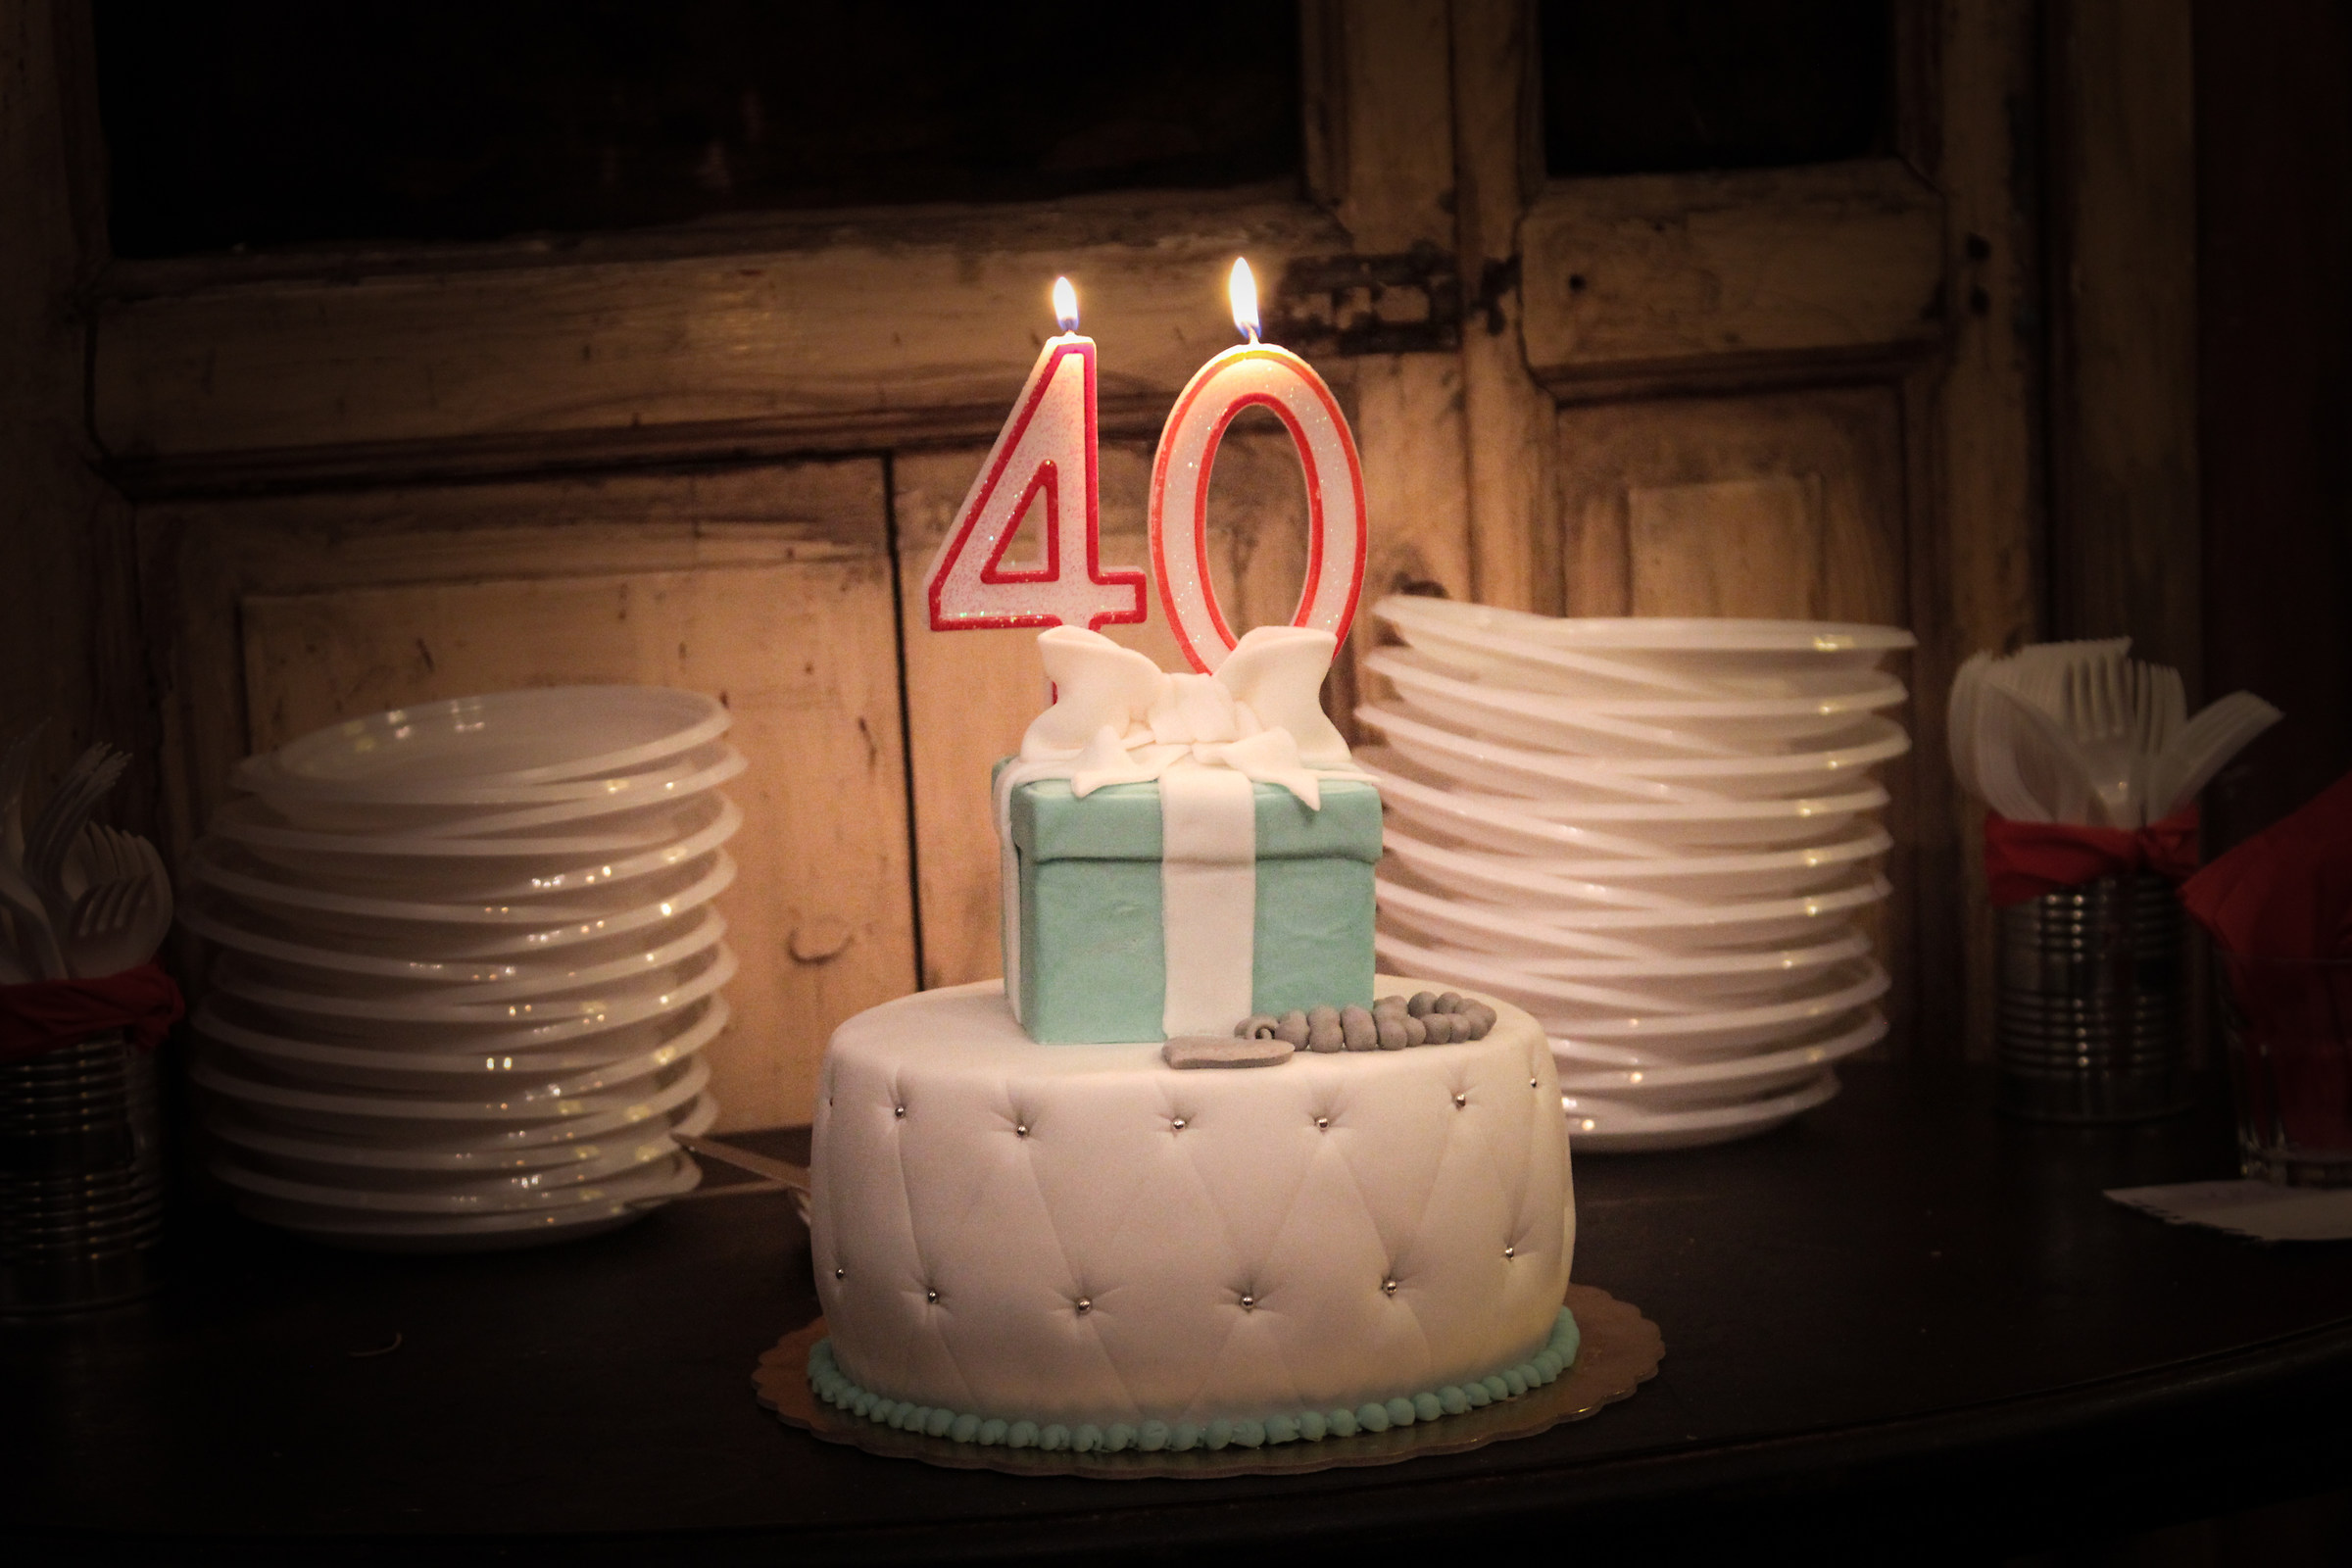 My first 40 years ......